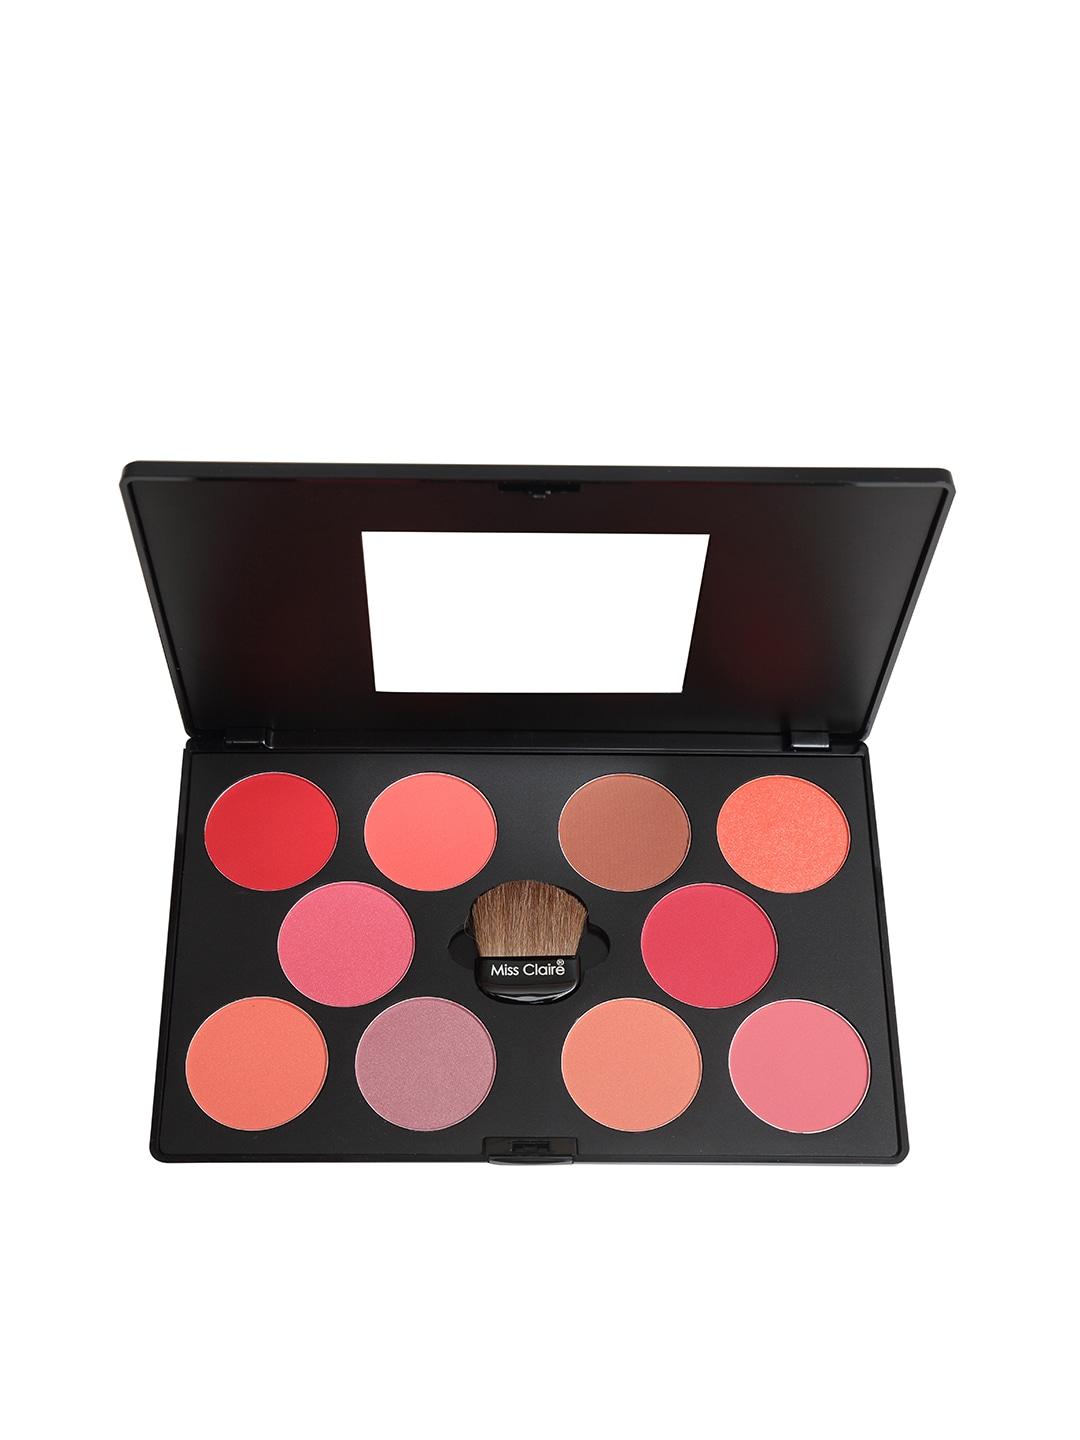 miss-claire-3-professional-blusher-palette-45-g